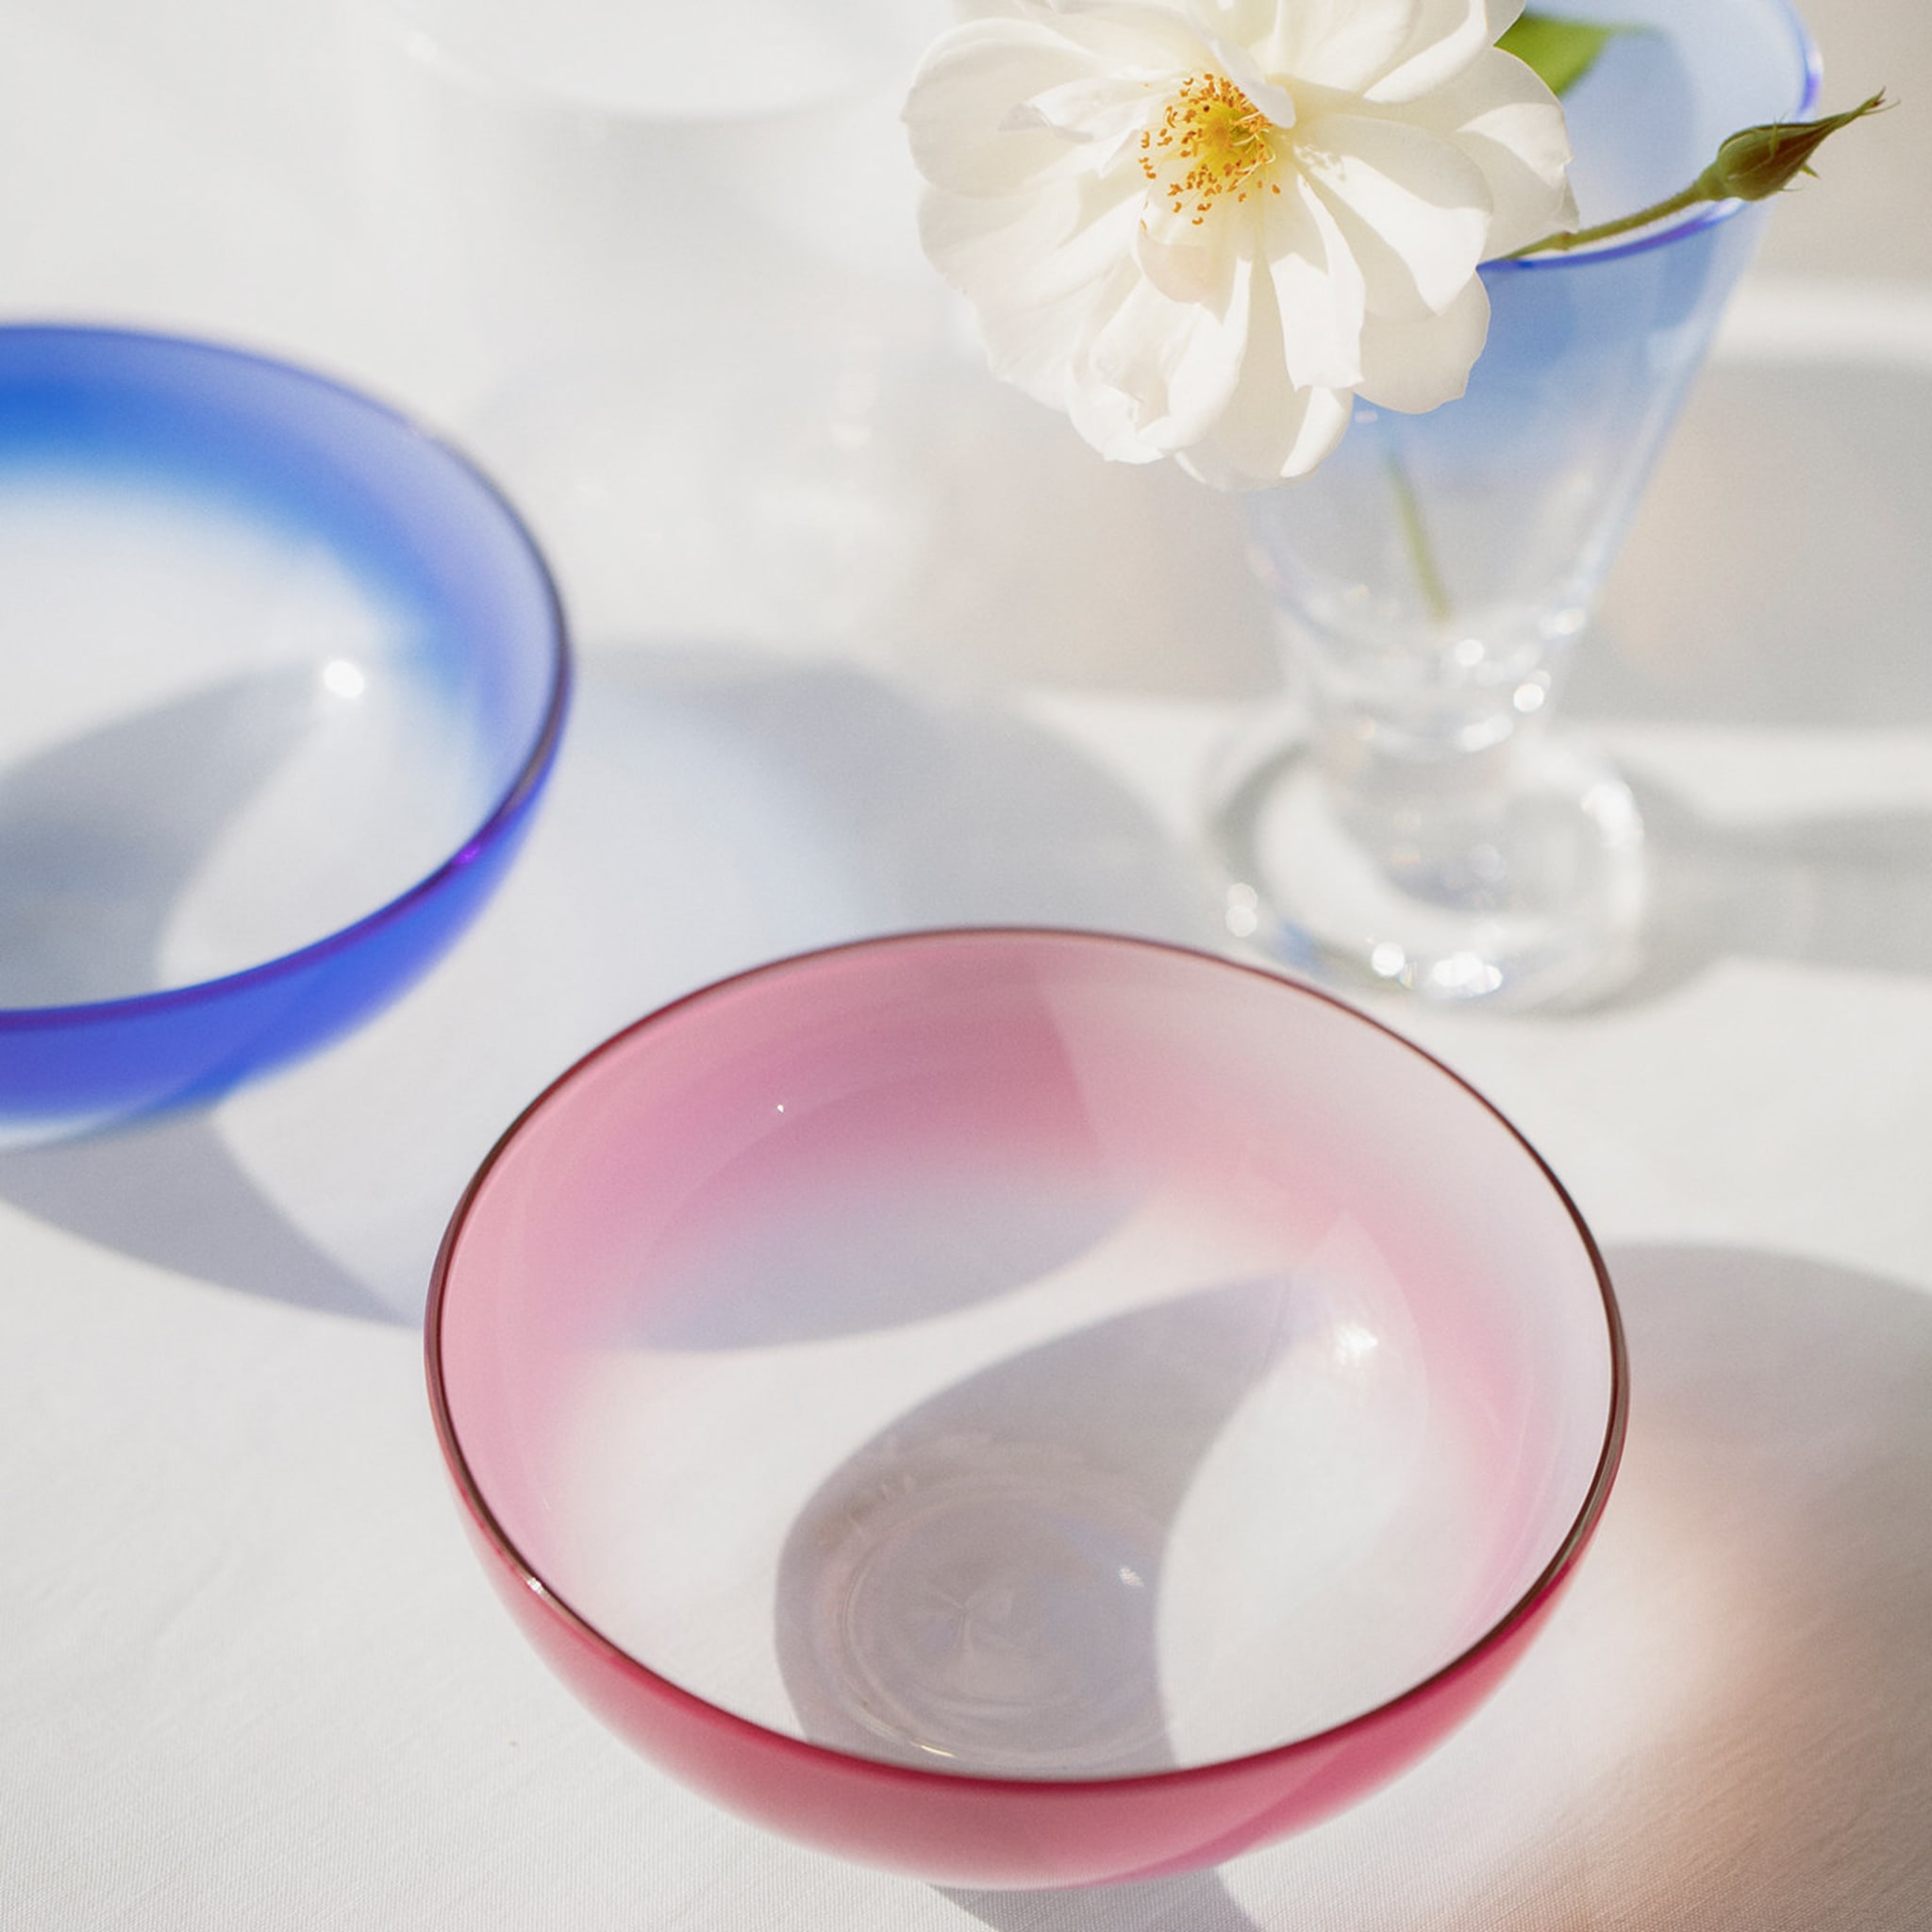 Aria Set of 2 Small Pink Bowls - Alternative view 1